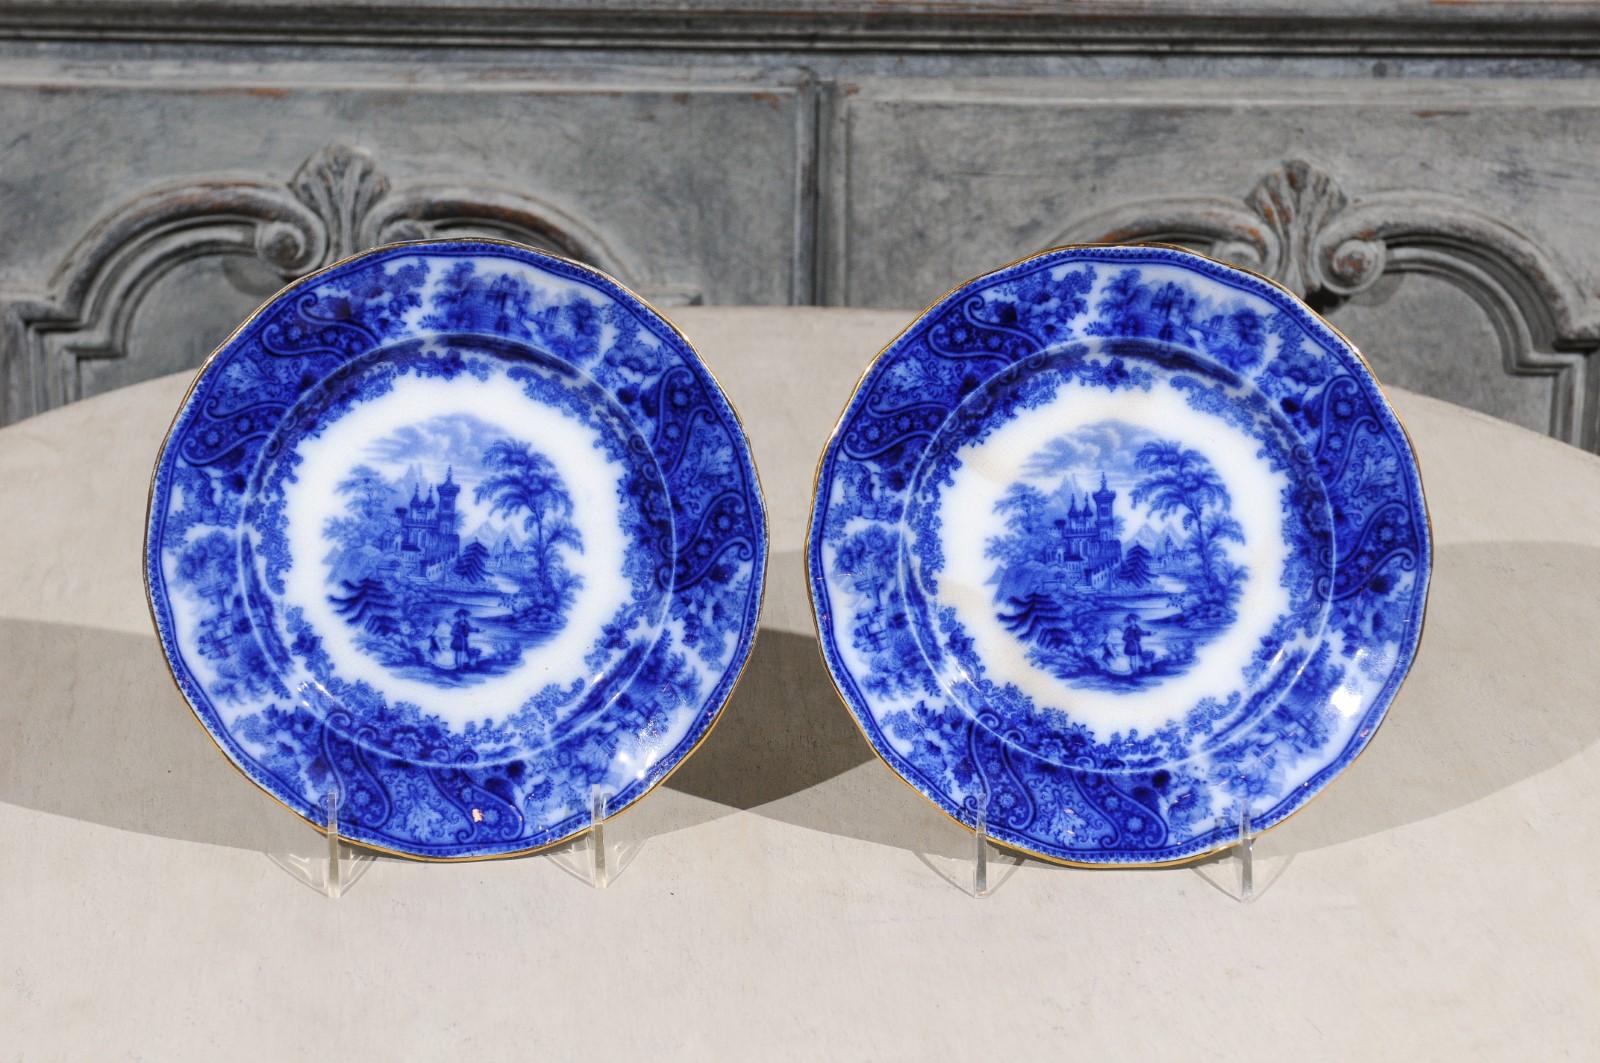 19th Century Two English Burgess & Leigh Middleport Plates with Flow Blue Nonpareil Patterns